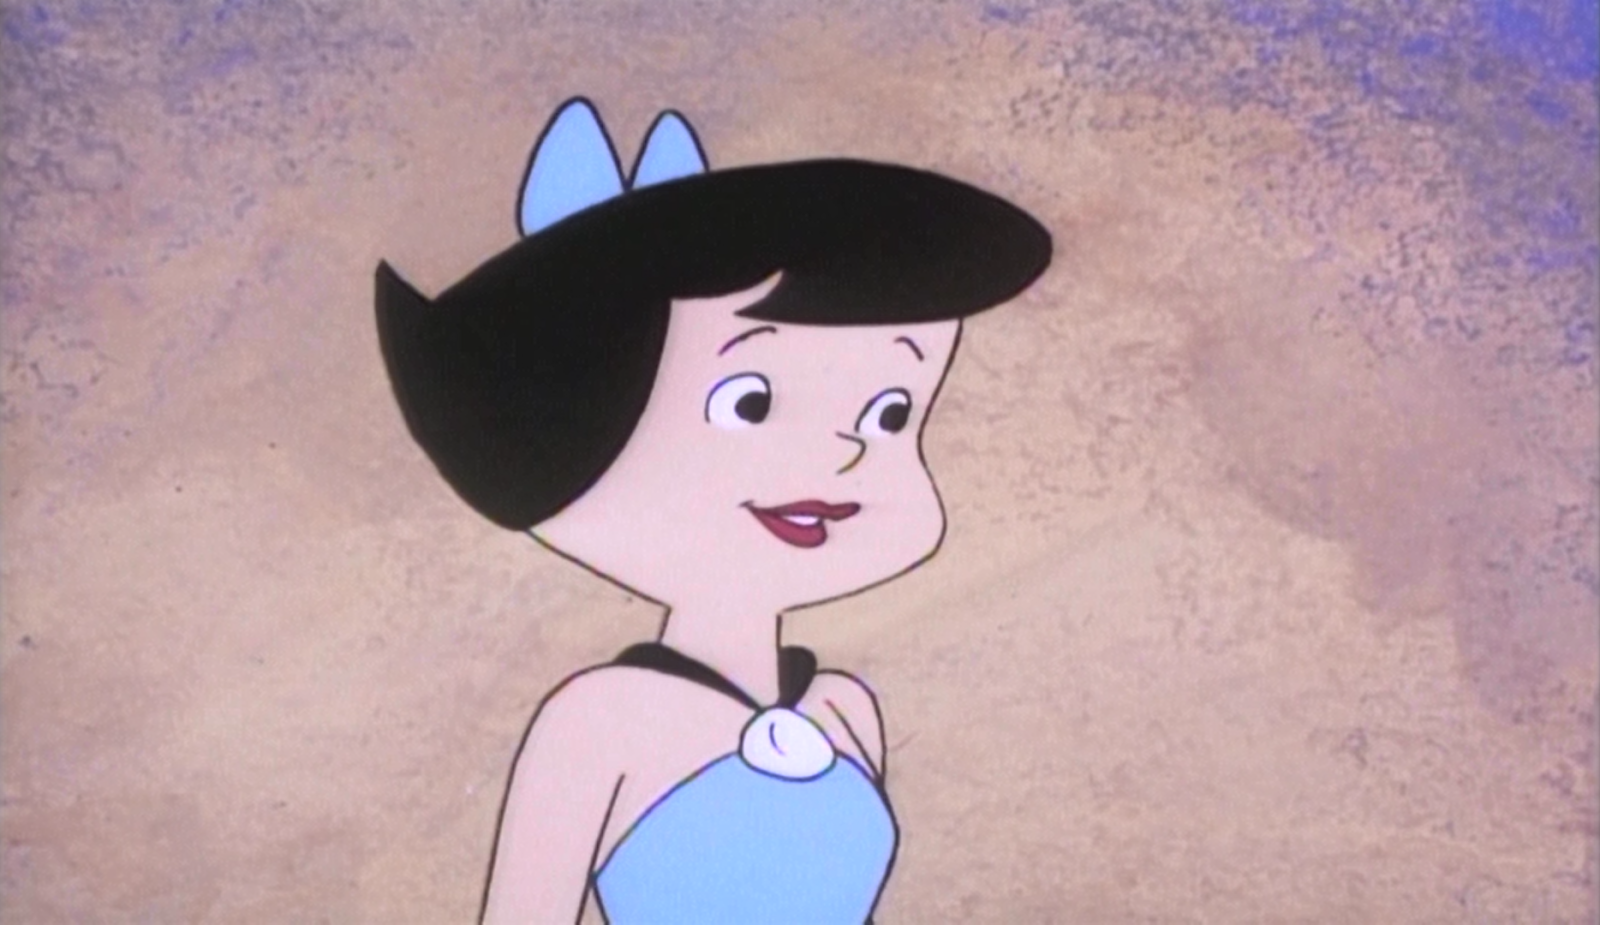 Betty Rubble, pictorial.